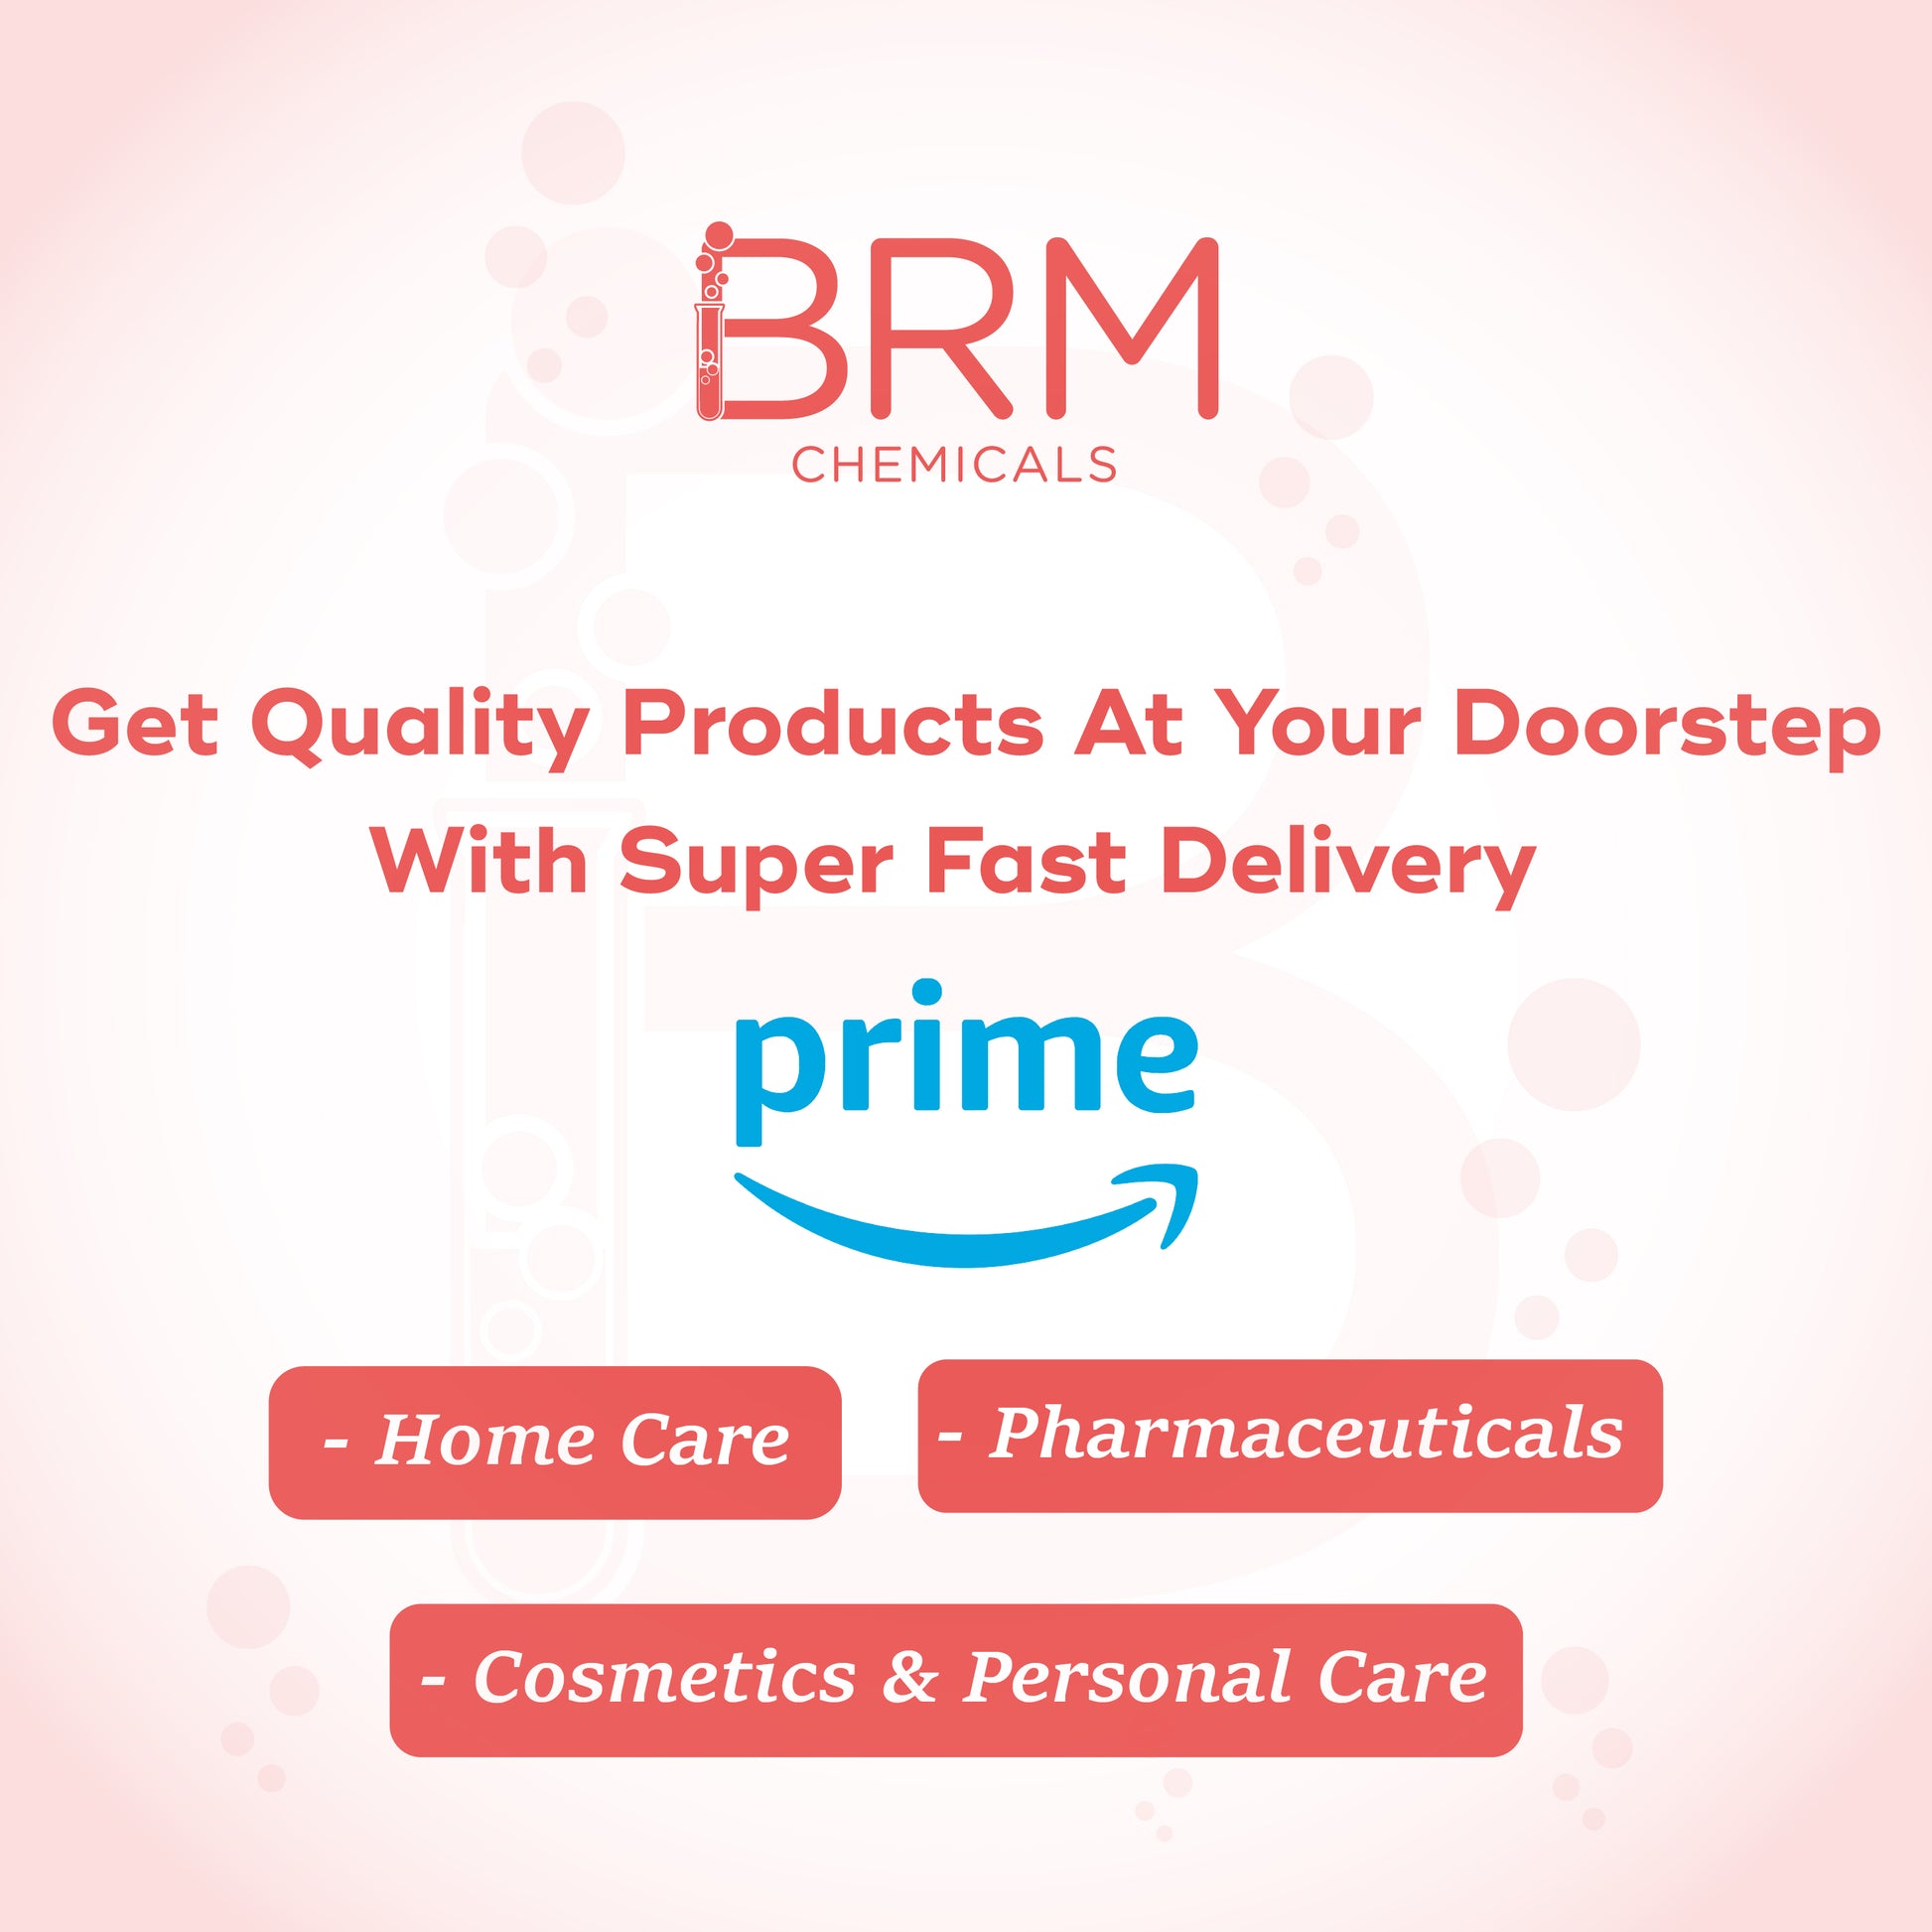 BRM chemicals' poster for fast delivery to doorstep